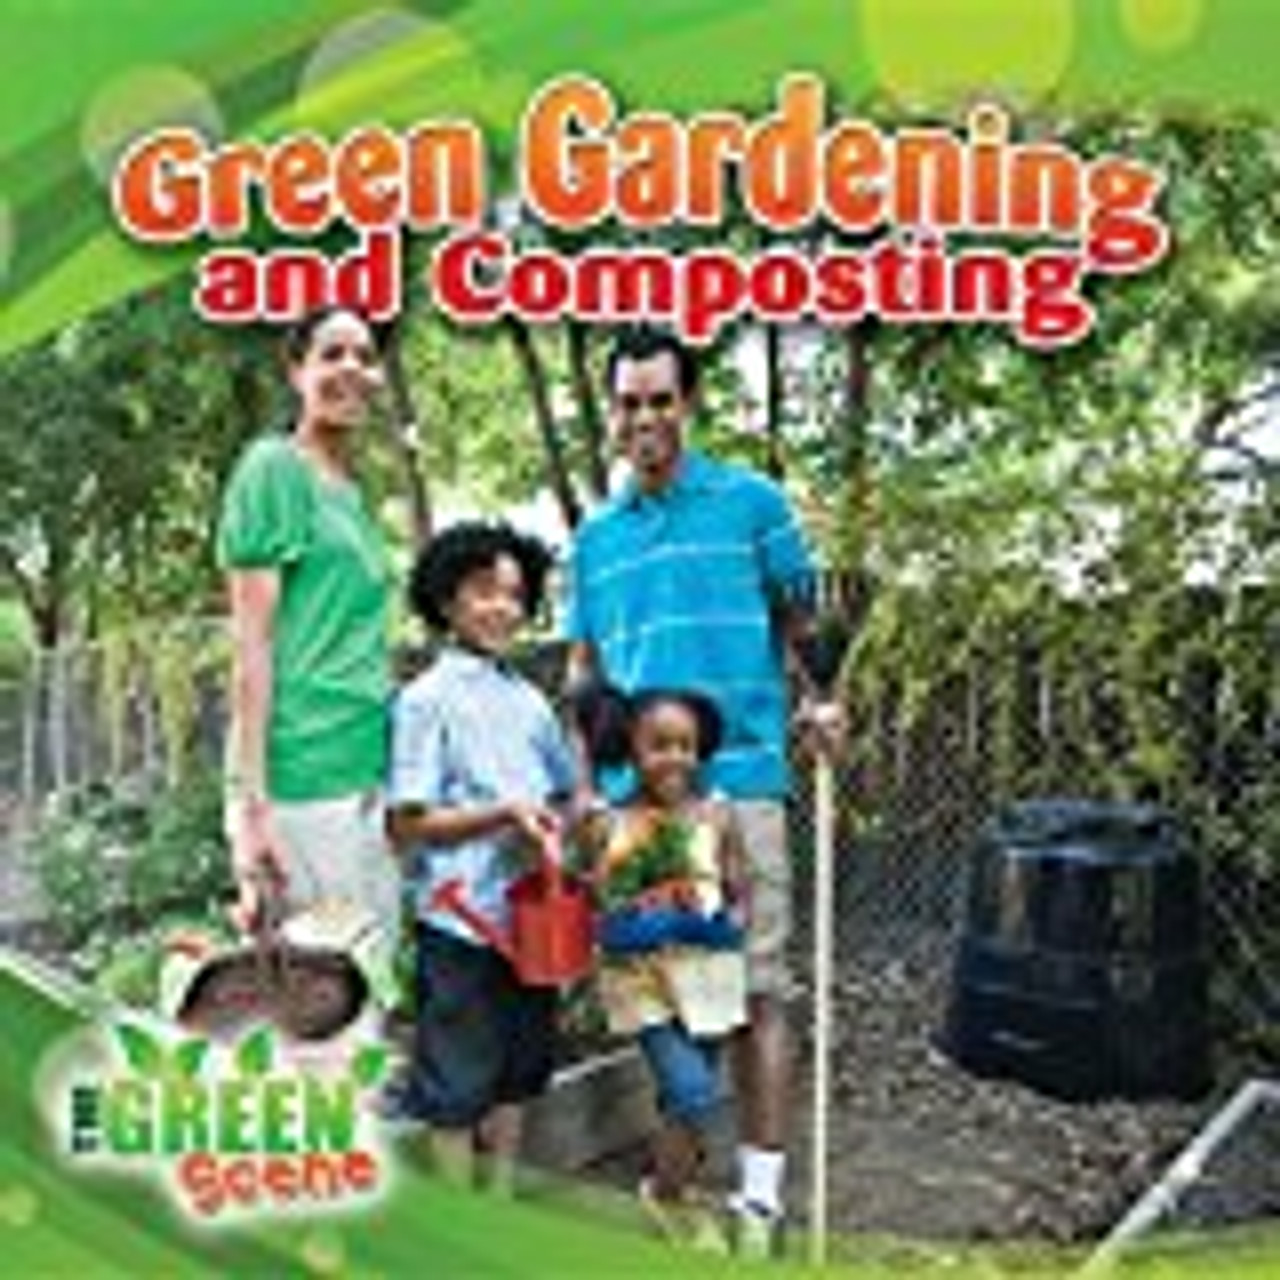 <p>Accessible text and engaging photographs introduce composting and Earth-friendly gardening. Readers learn how to build a compost bin, what items to recycle in the bin, and how to use compost to start their own garden.</p>